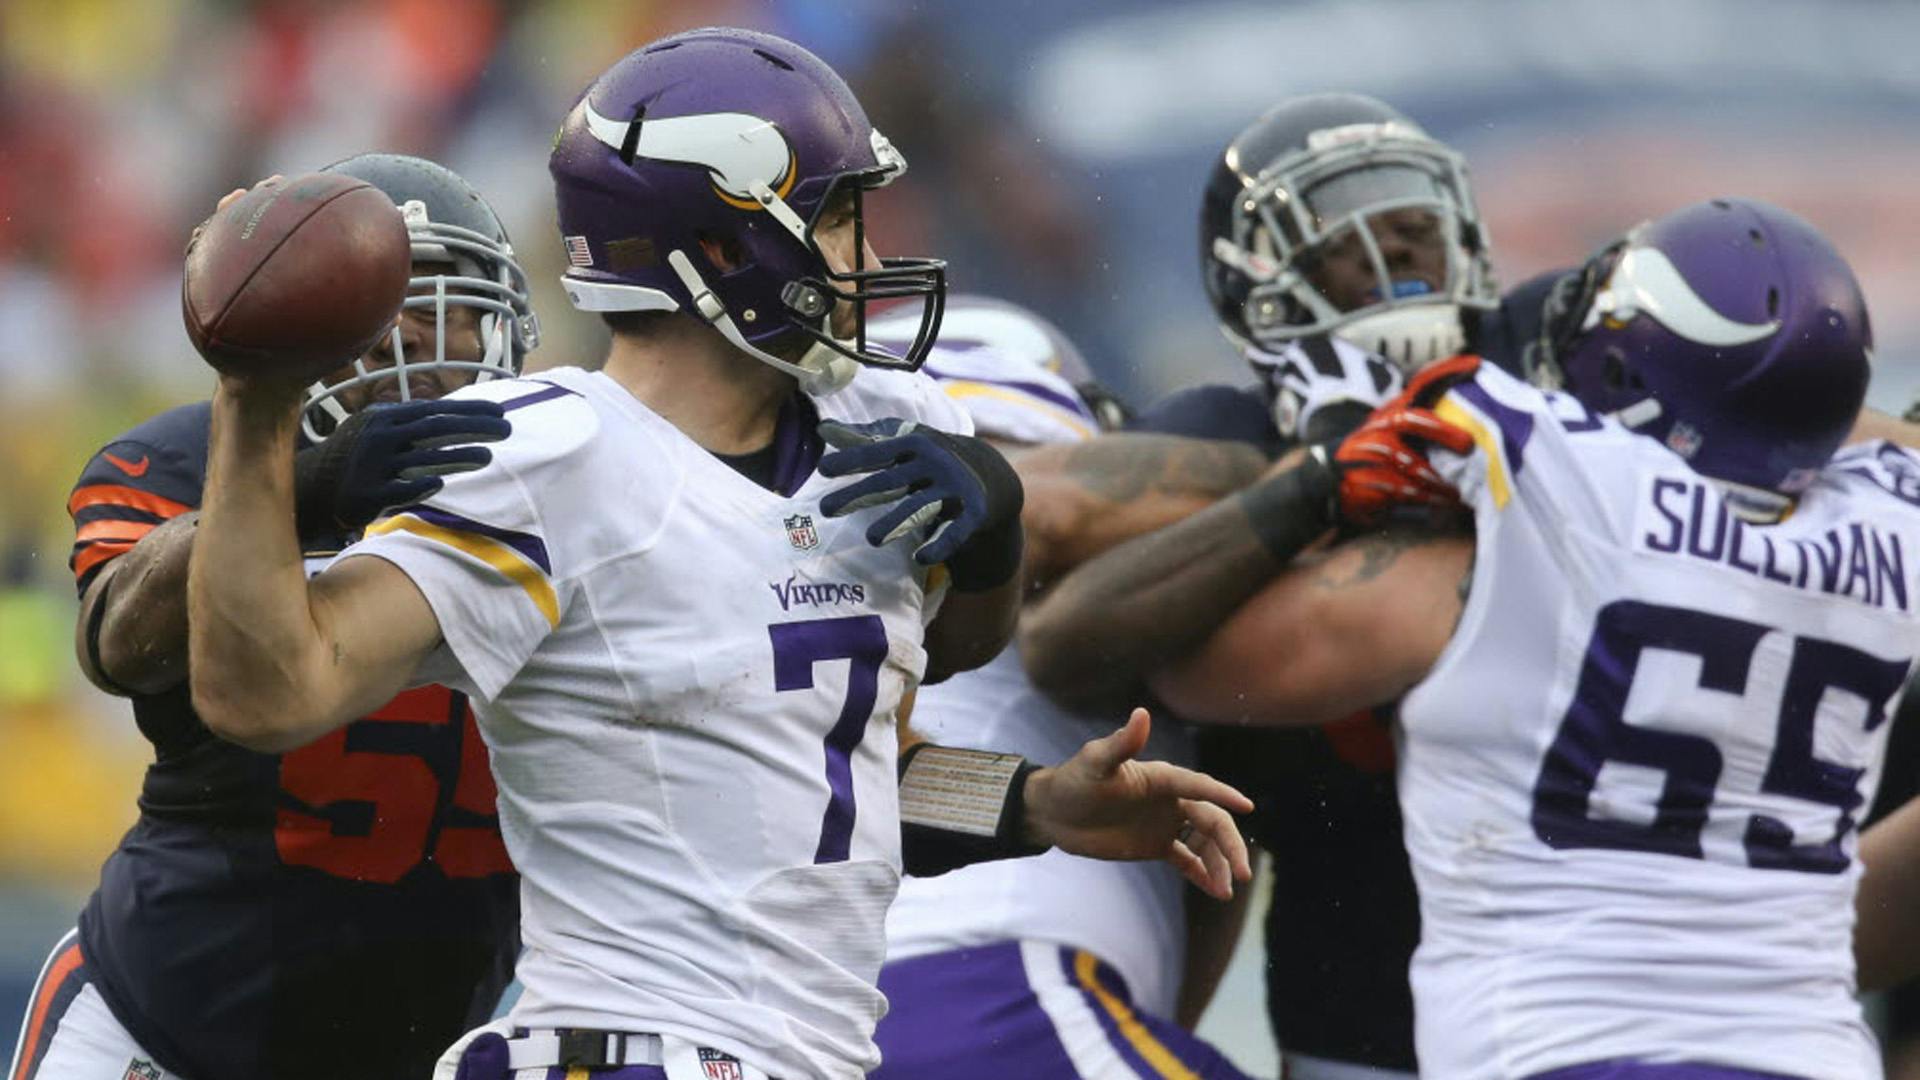 Quarterback Christian Ponder spoke to reporters after the Vikings lost 31-30 to the Chicago Bears.